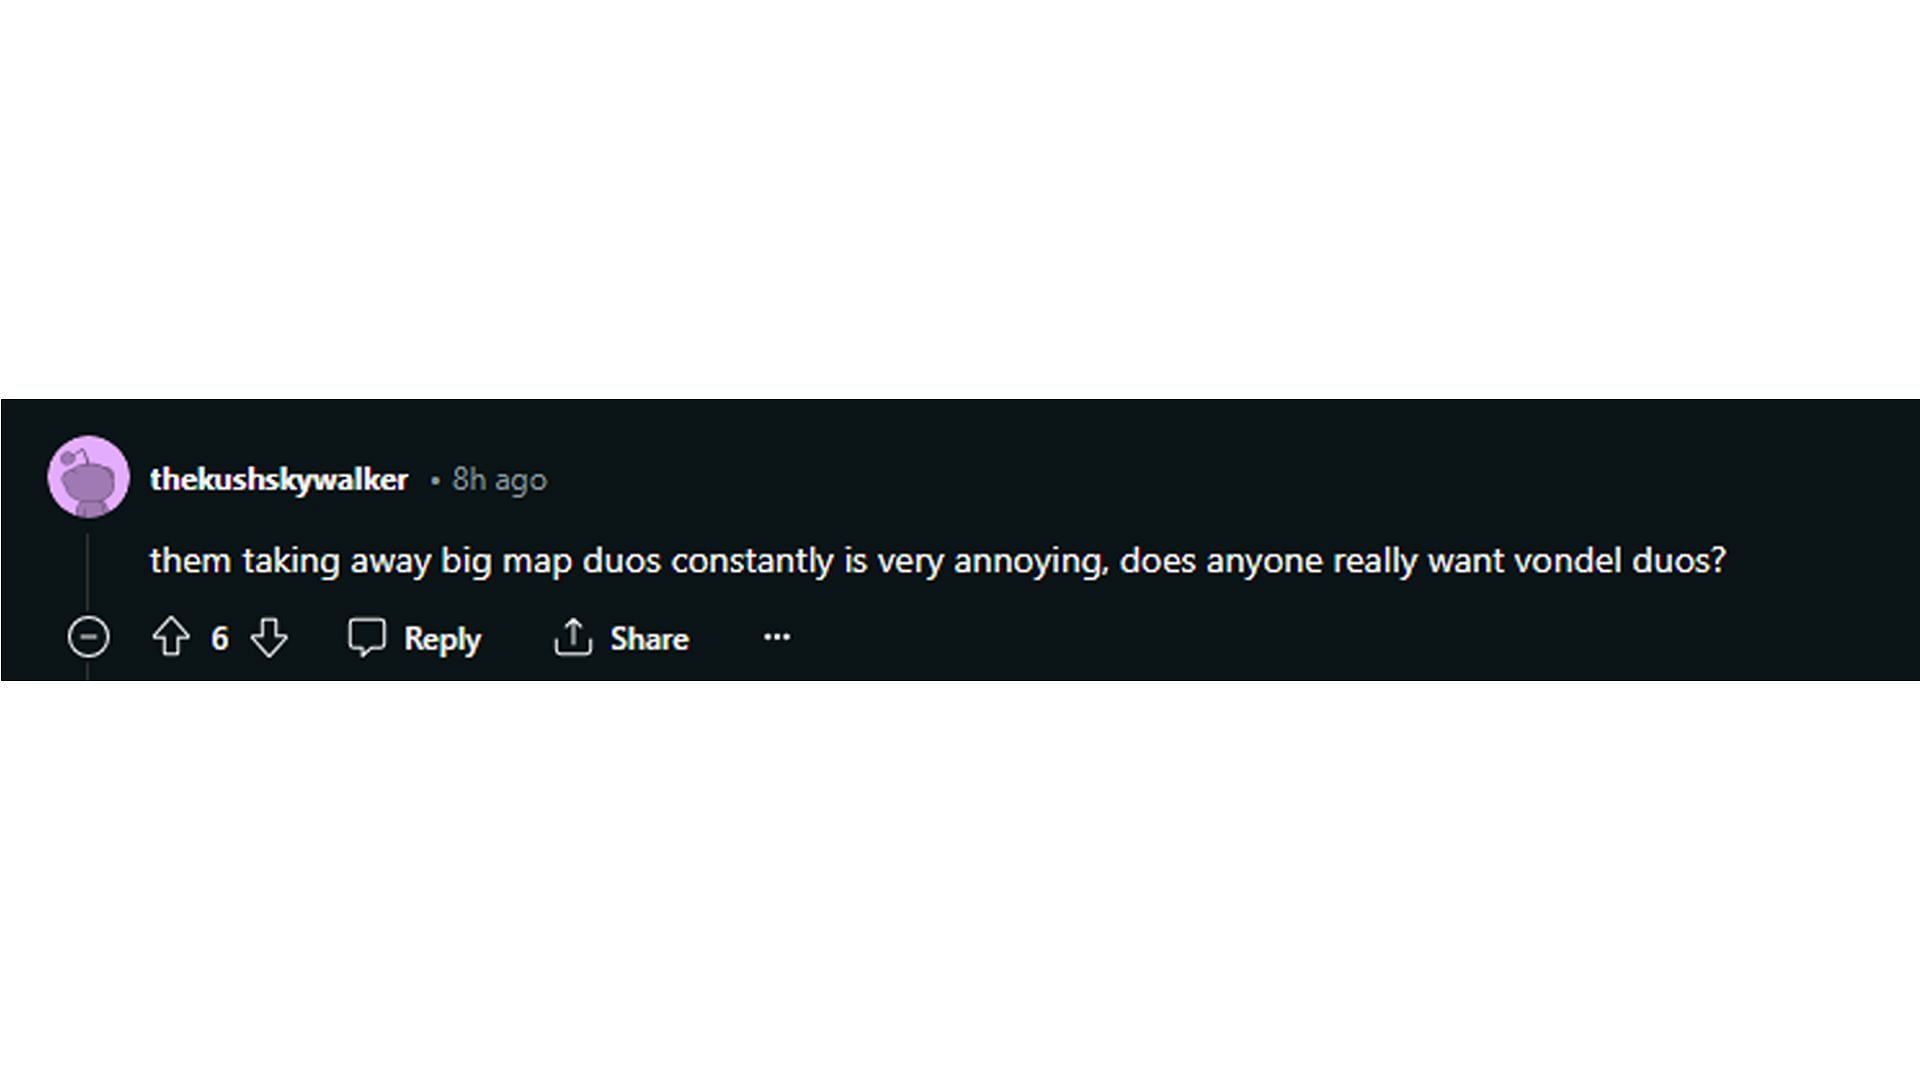 Reddit user shares their concern over the removal of big maps from duos in Warzone (Image via Reddit)